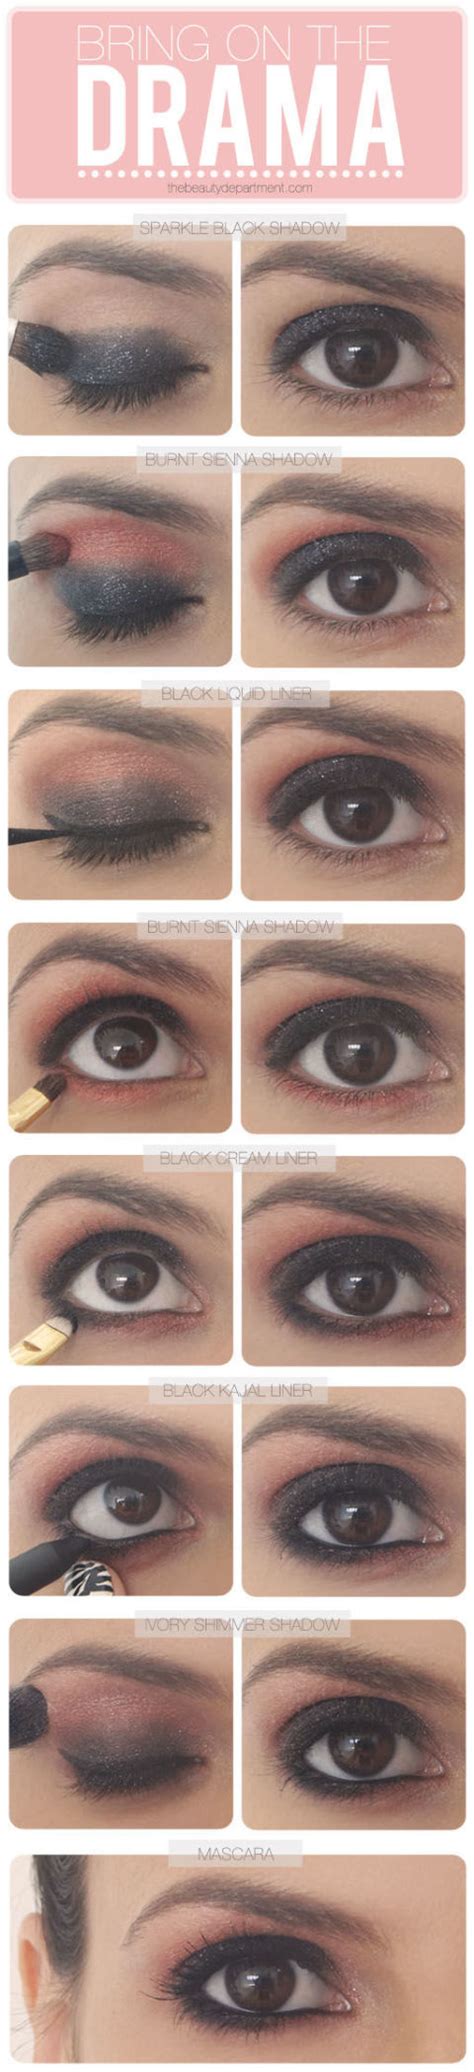 10 Eye Makeup Tutorials From Pinterest That Ll Turn You Into A Beauty Pro